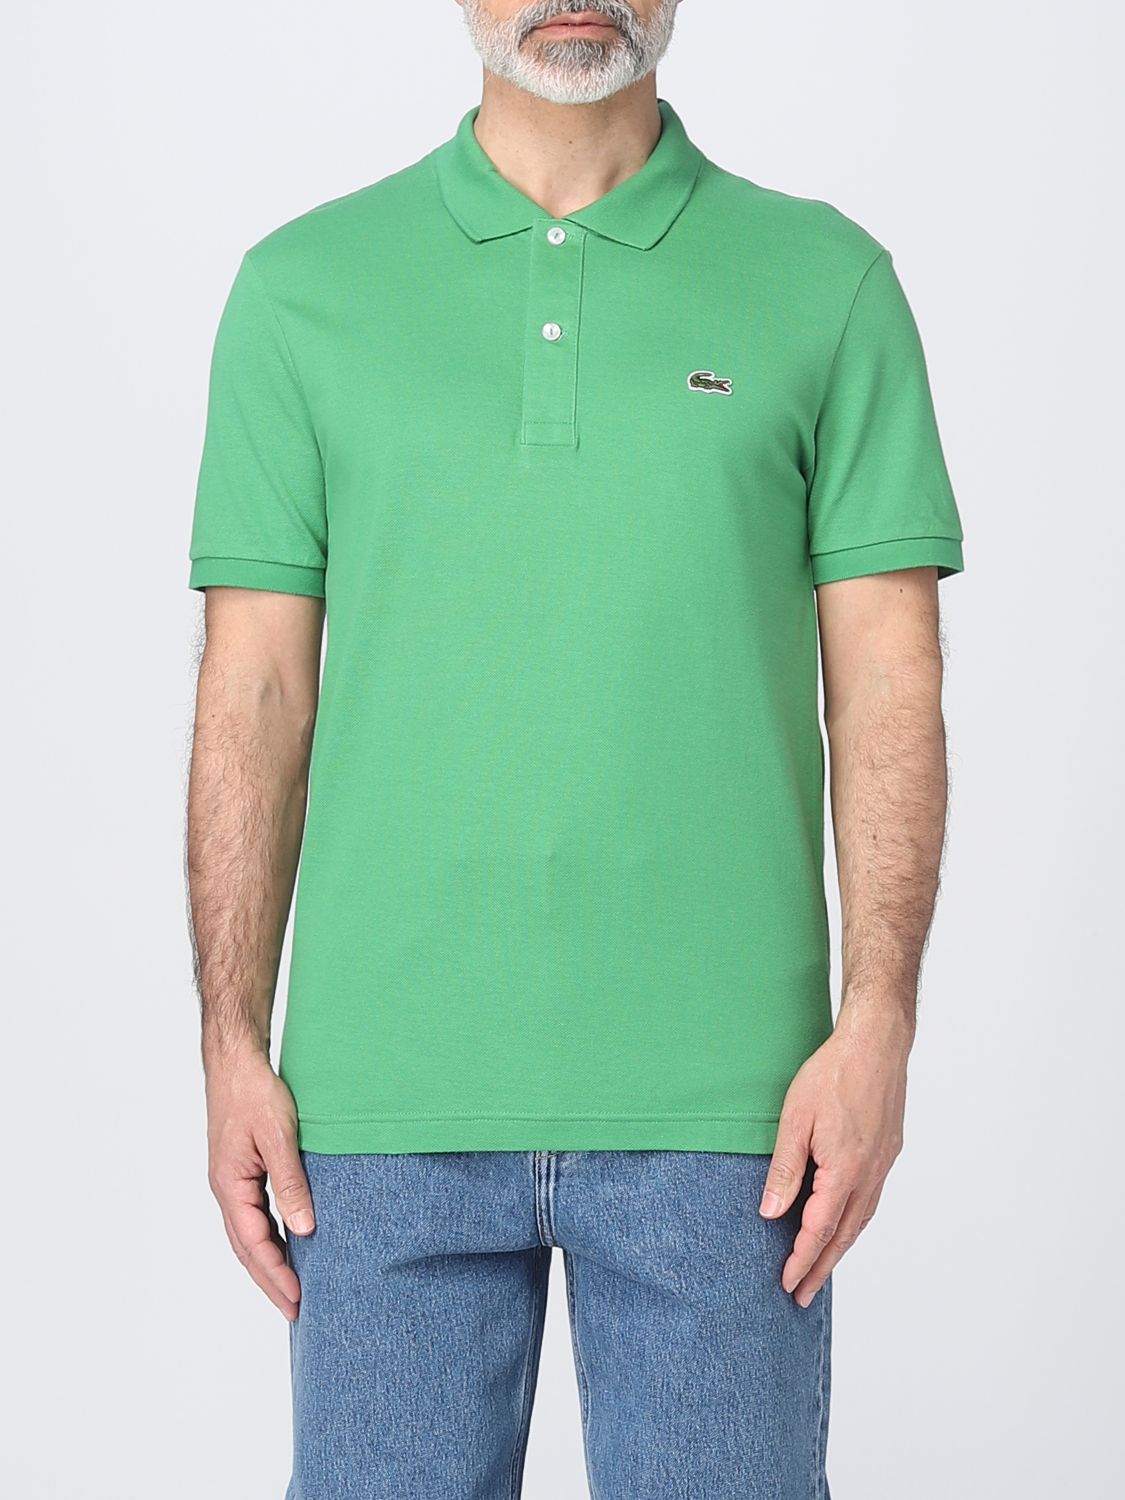 premier Annoteren complicaties LACOSTE: polo shirt for man - Moss Green | Lacoste polo shirt PH4012 online  on GIGLIO.COM